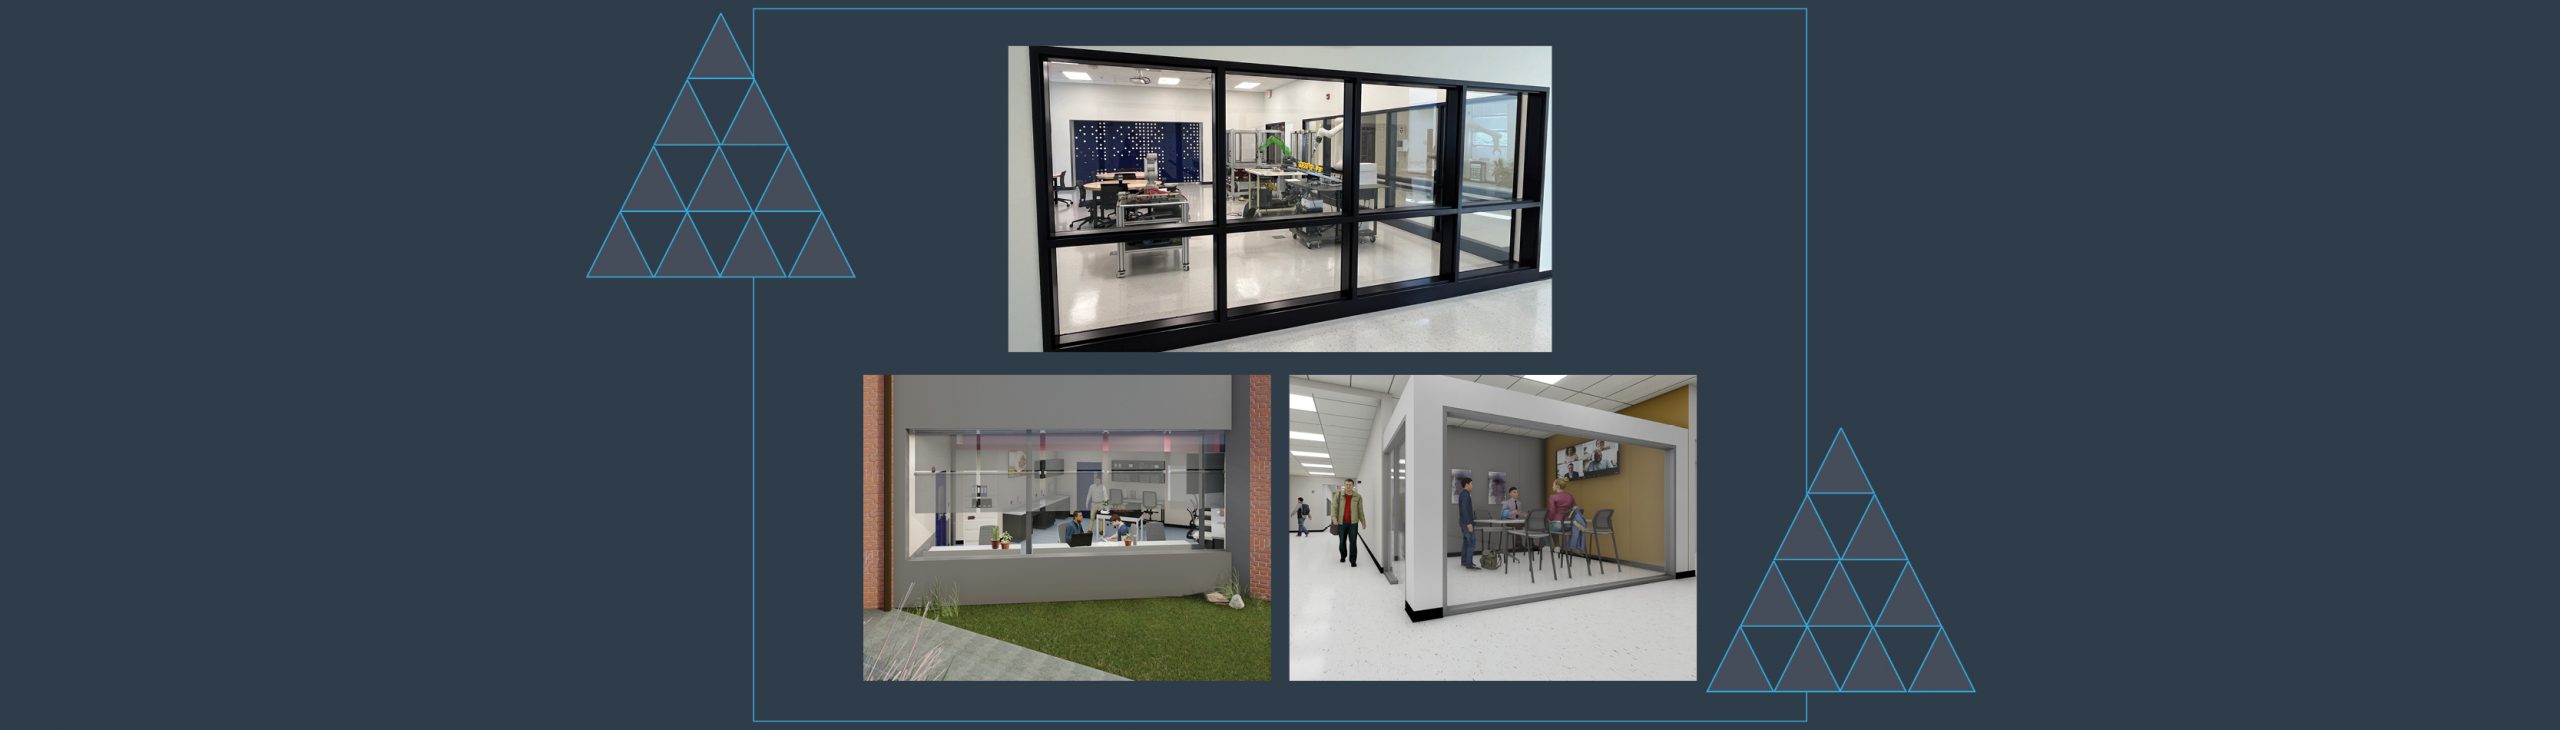 Investment in Collegiate Athletic Facilities Expands Attraction, Retention, and Revenue Generation